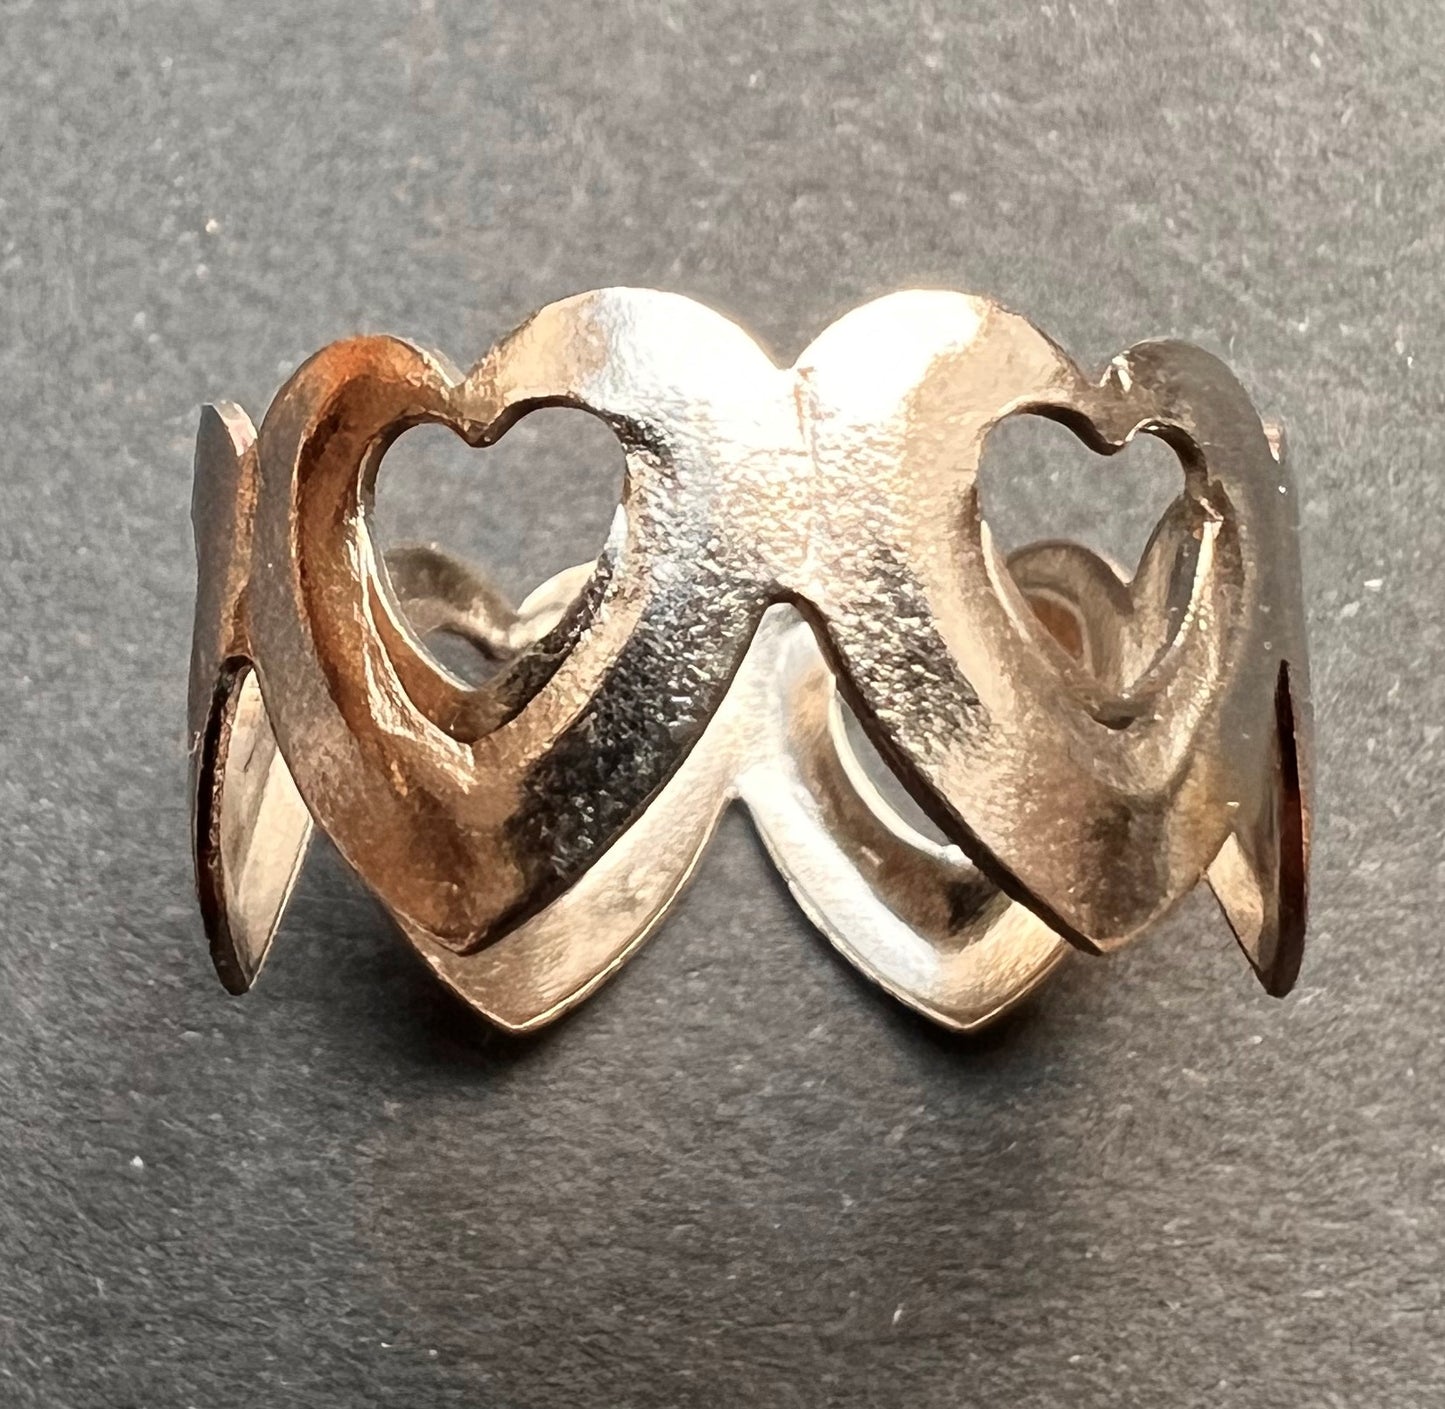 1970s Gold or Silver Tone Heart Rings